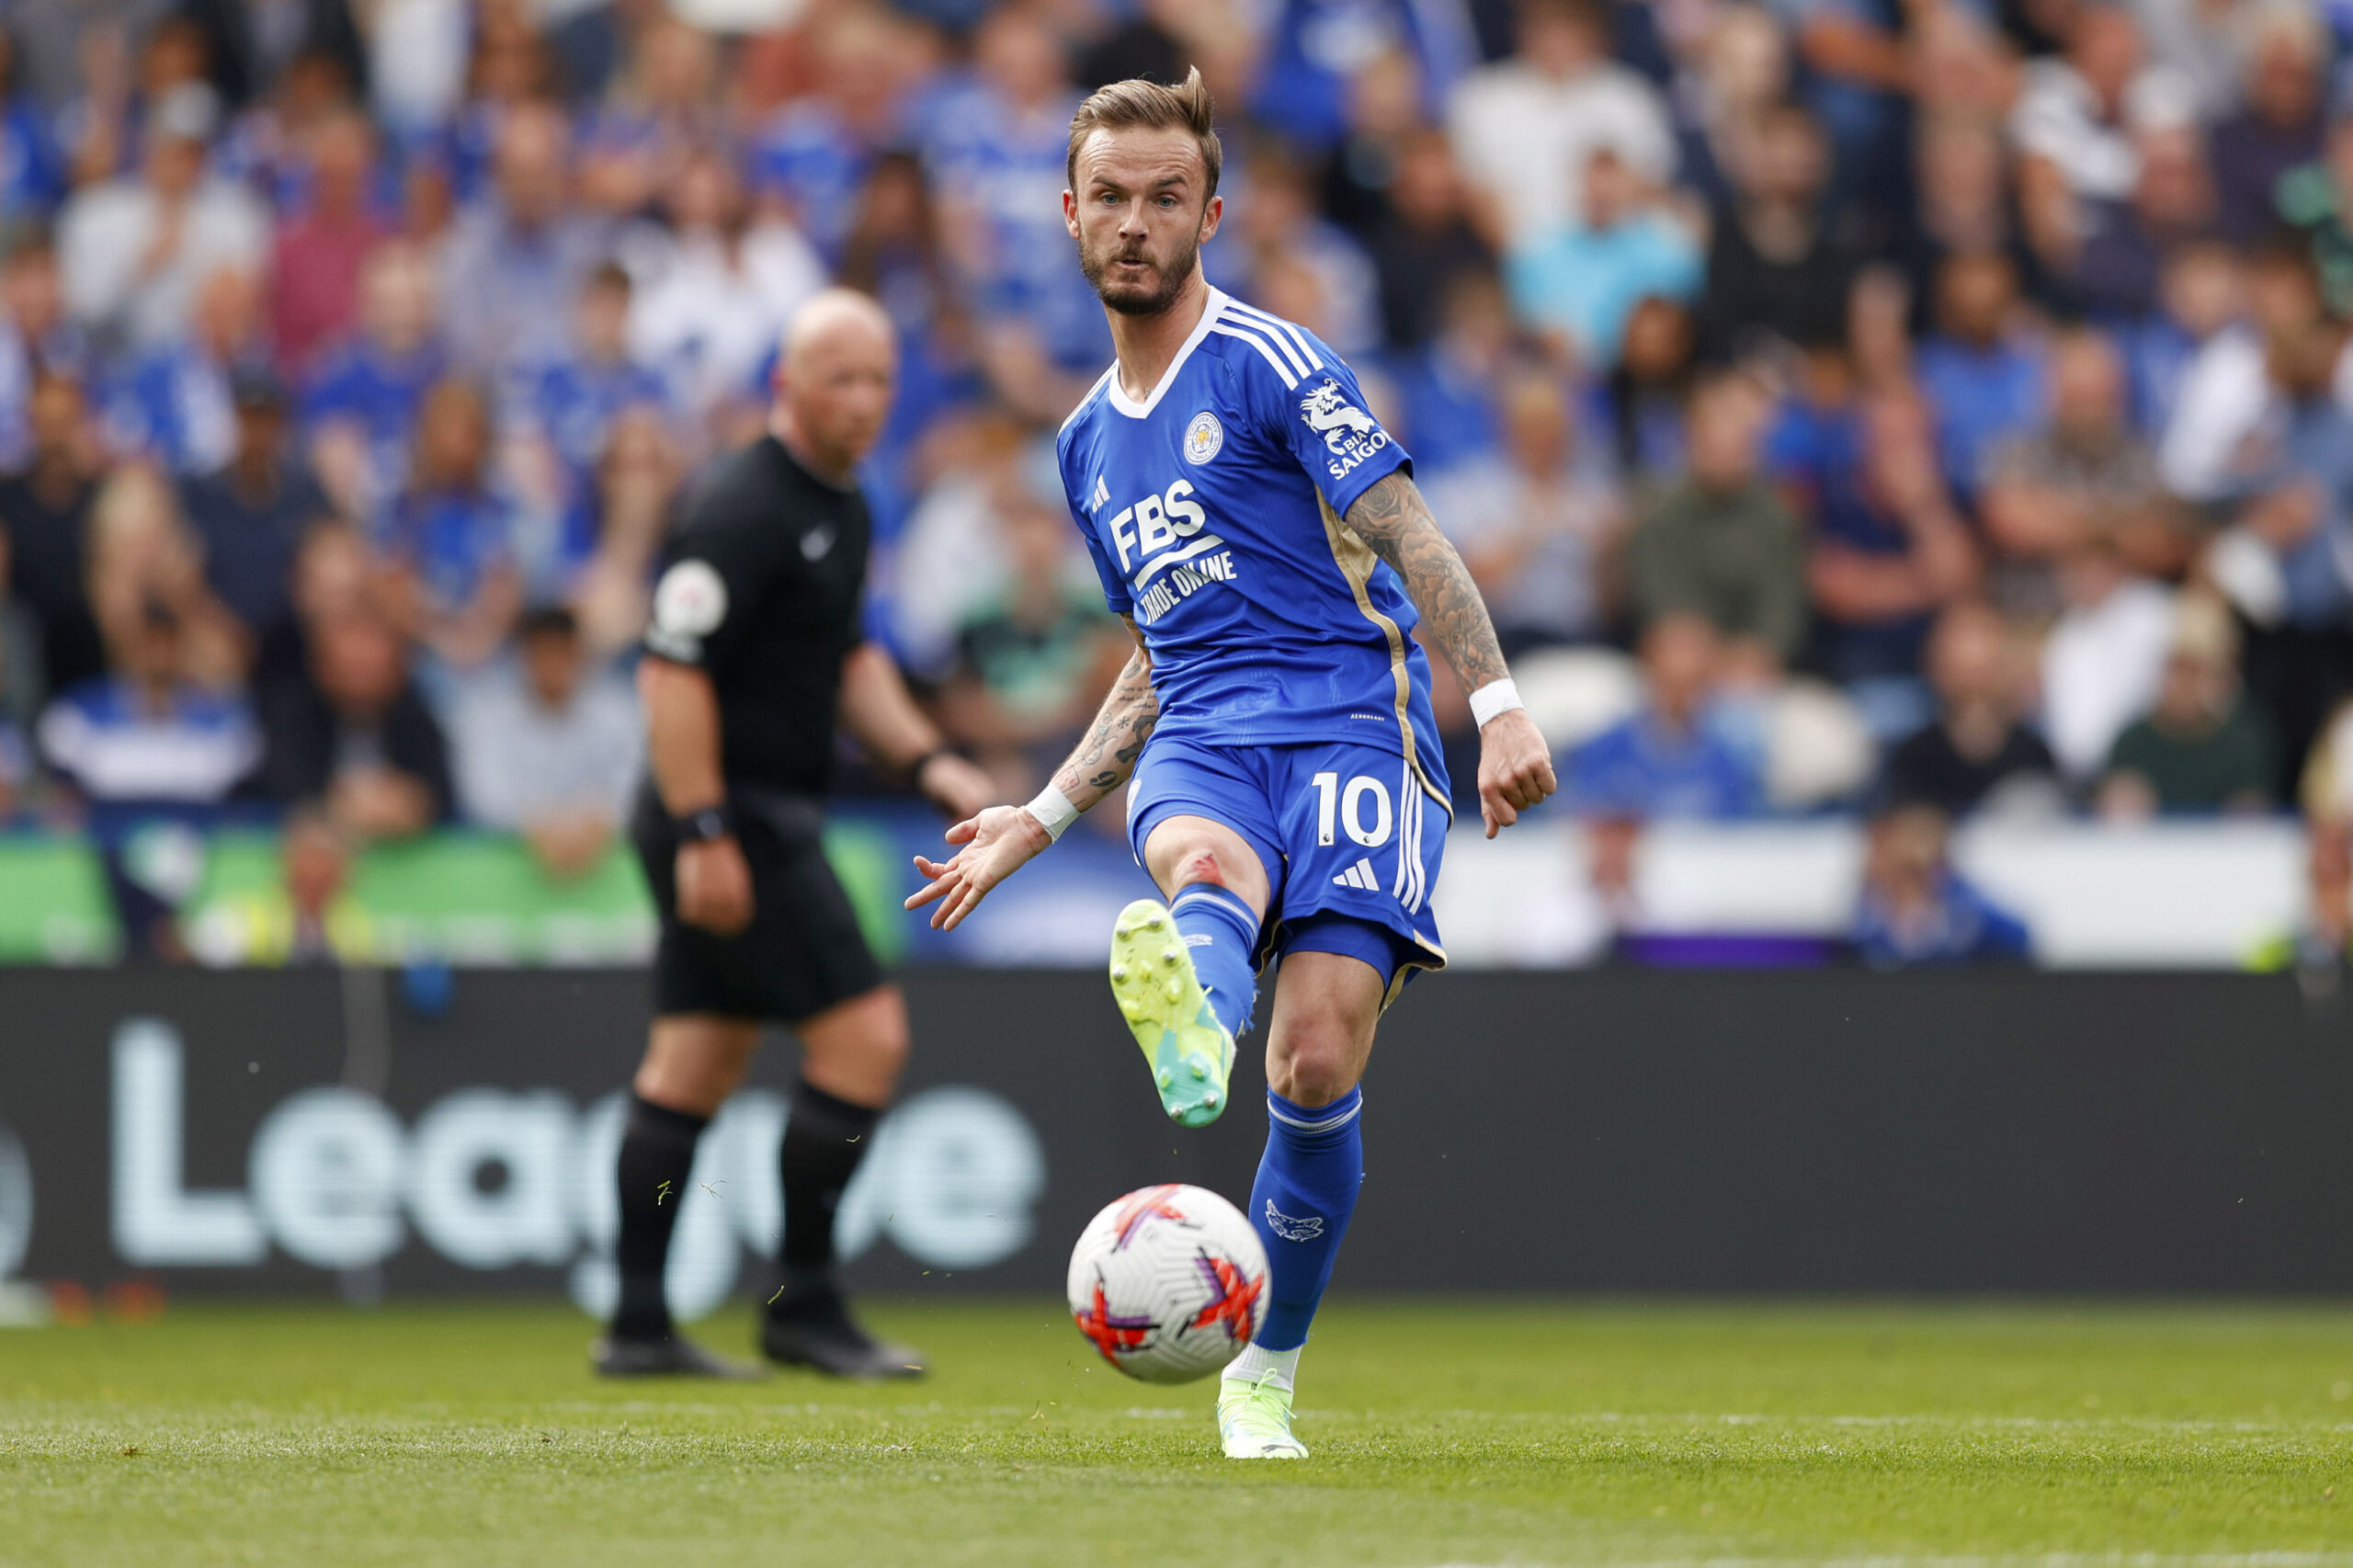 Leicester City's James Maddison | Backpack